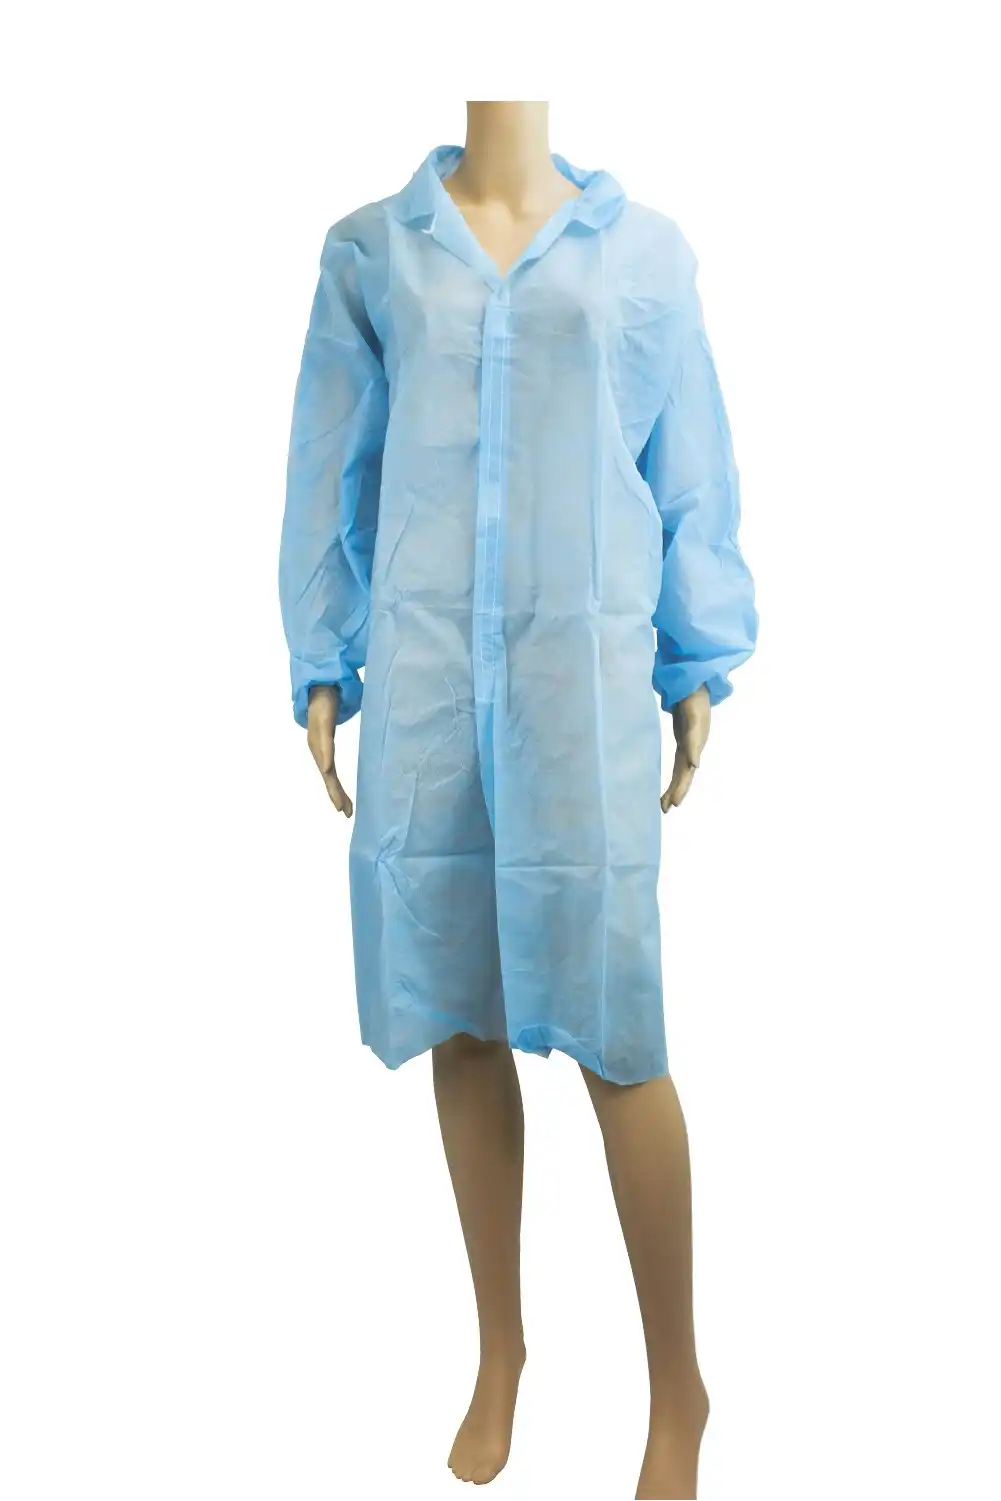 Livingstone Isolation Gown Long Sleeve One Touch Hook Loop Fastener Button w/o Pocket Free Size Blue